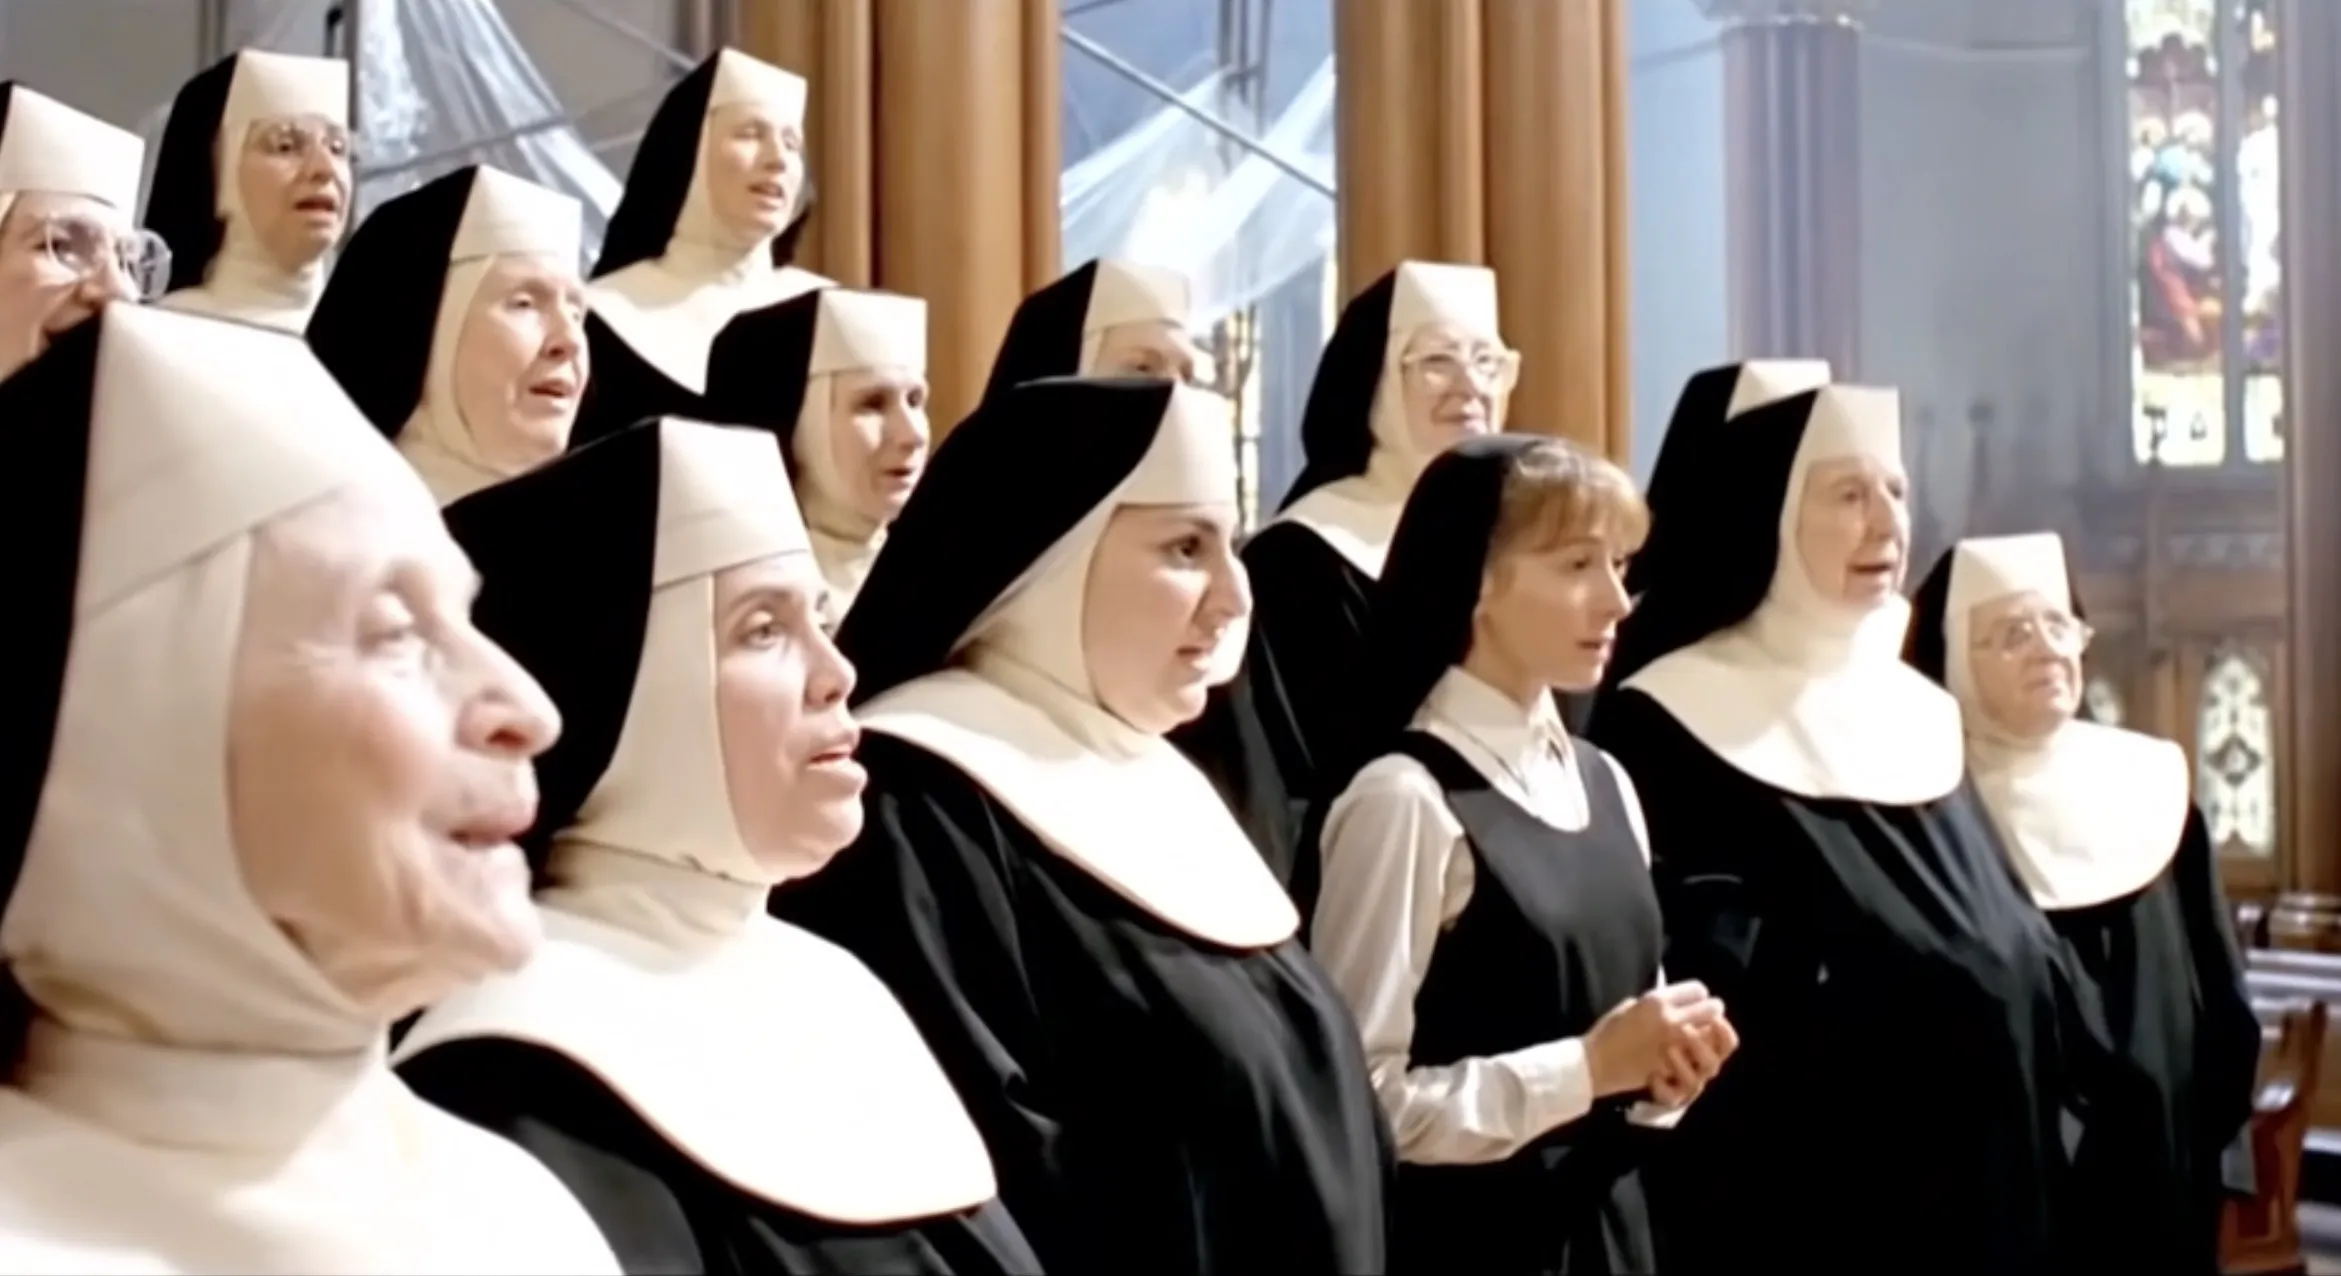 Remembering an Iconic Film: What Year Did Sister Act Come Out